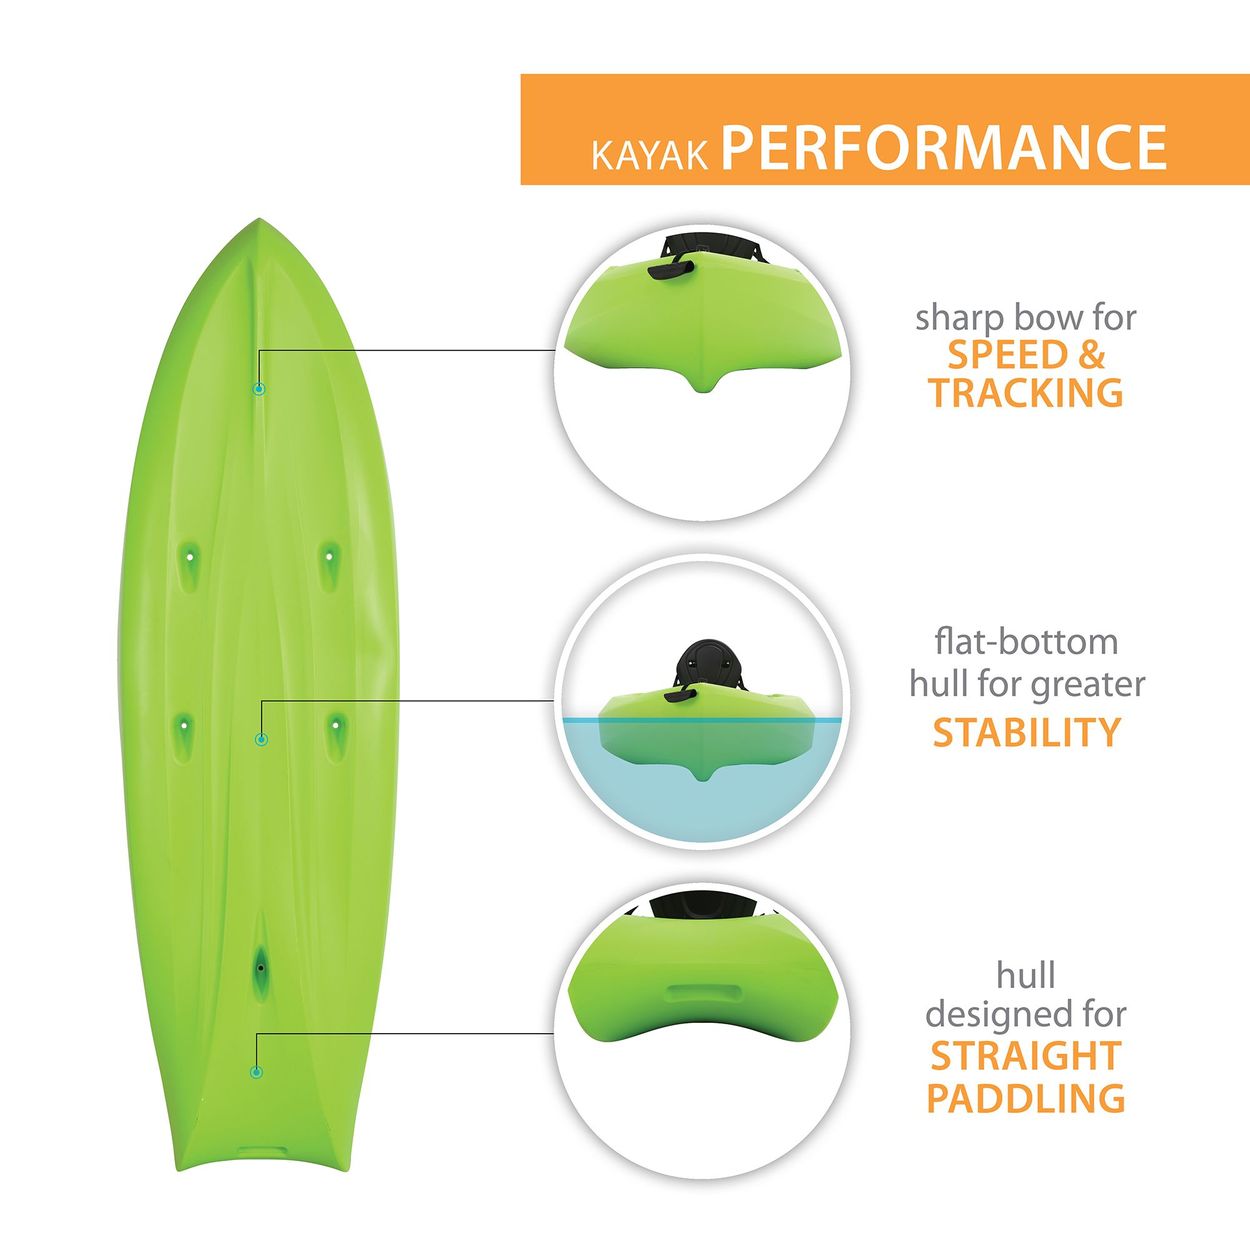 Studio image of the bottom of the kayak with Features for performace of speed and tracking, stability, and hull design in close up bubbles